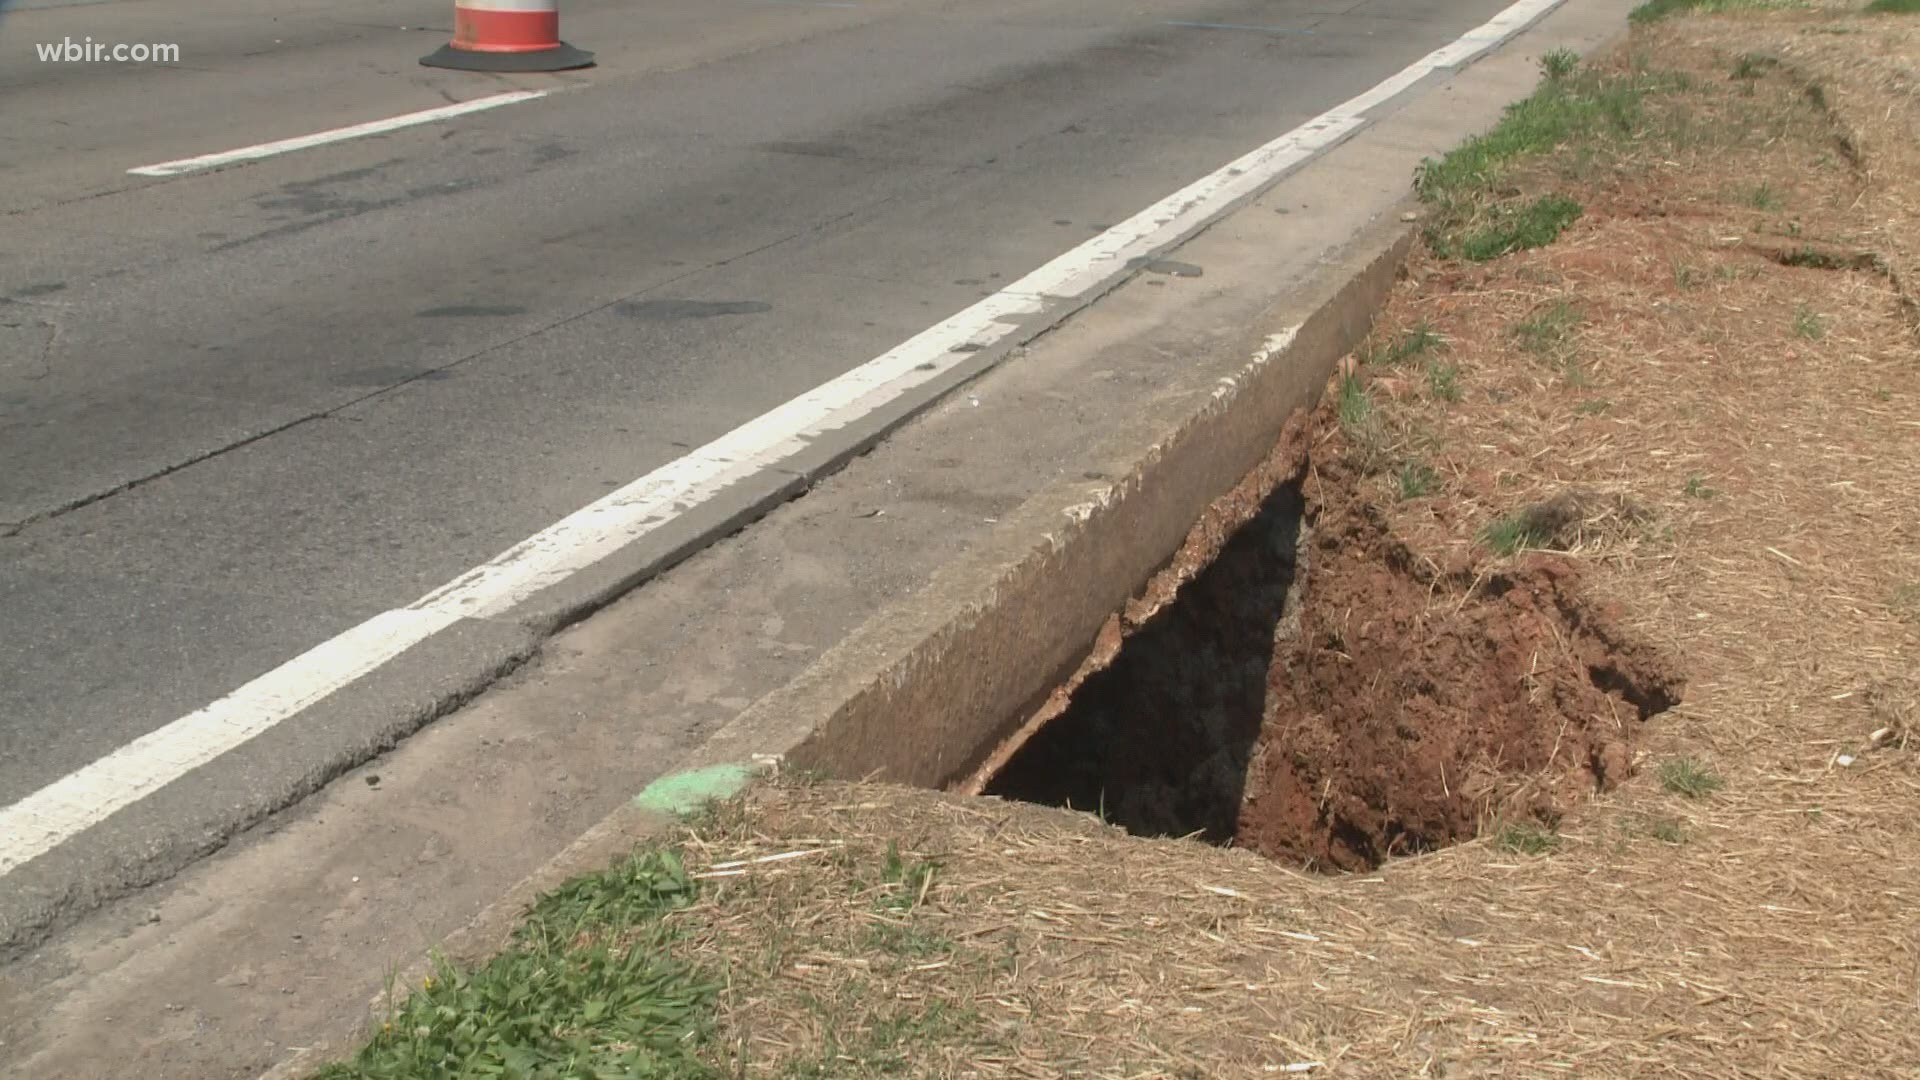 A failed storm sewer pipe on the eastbound side of the road created the hole.